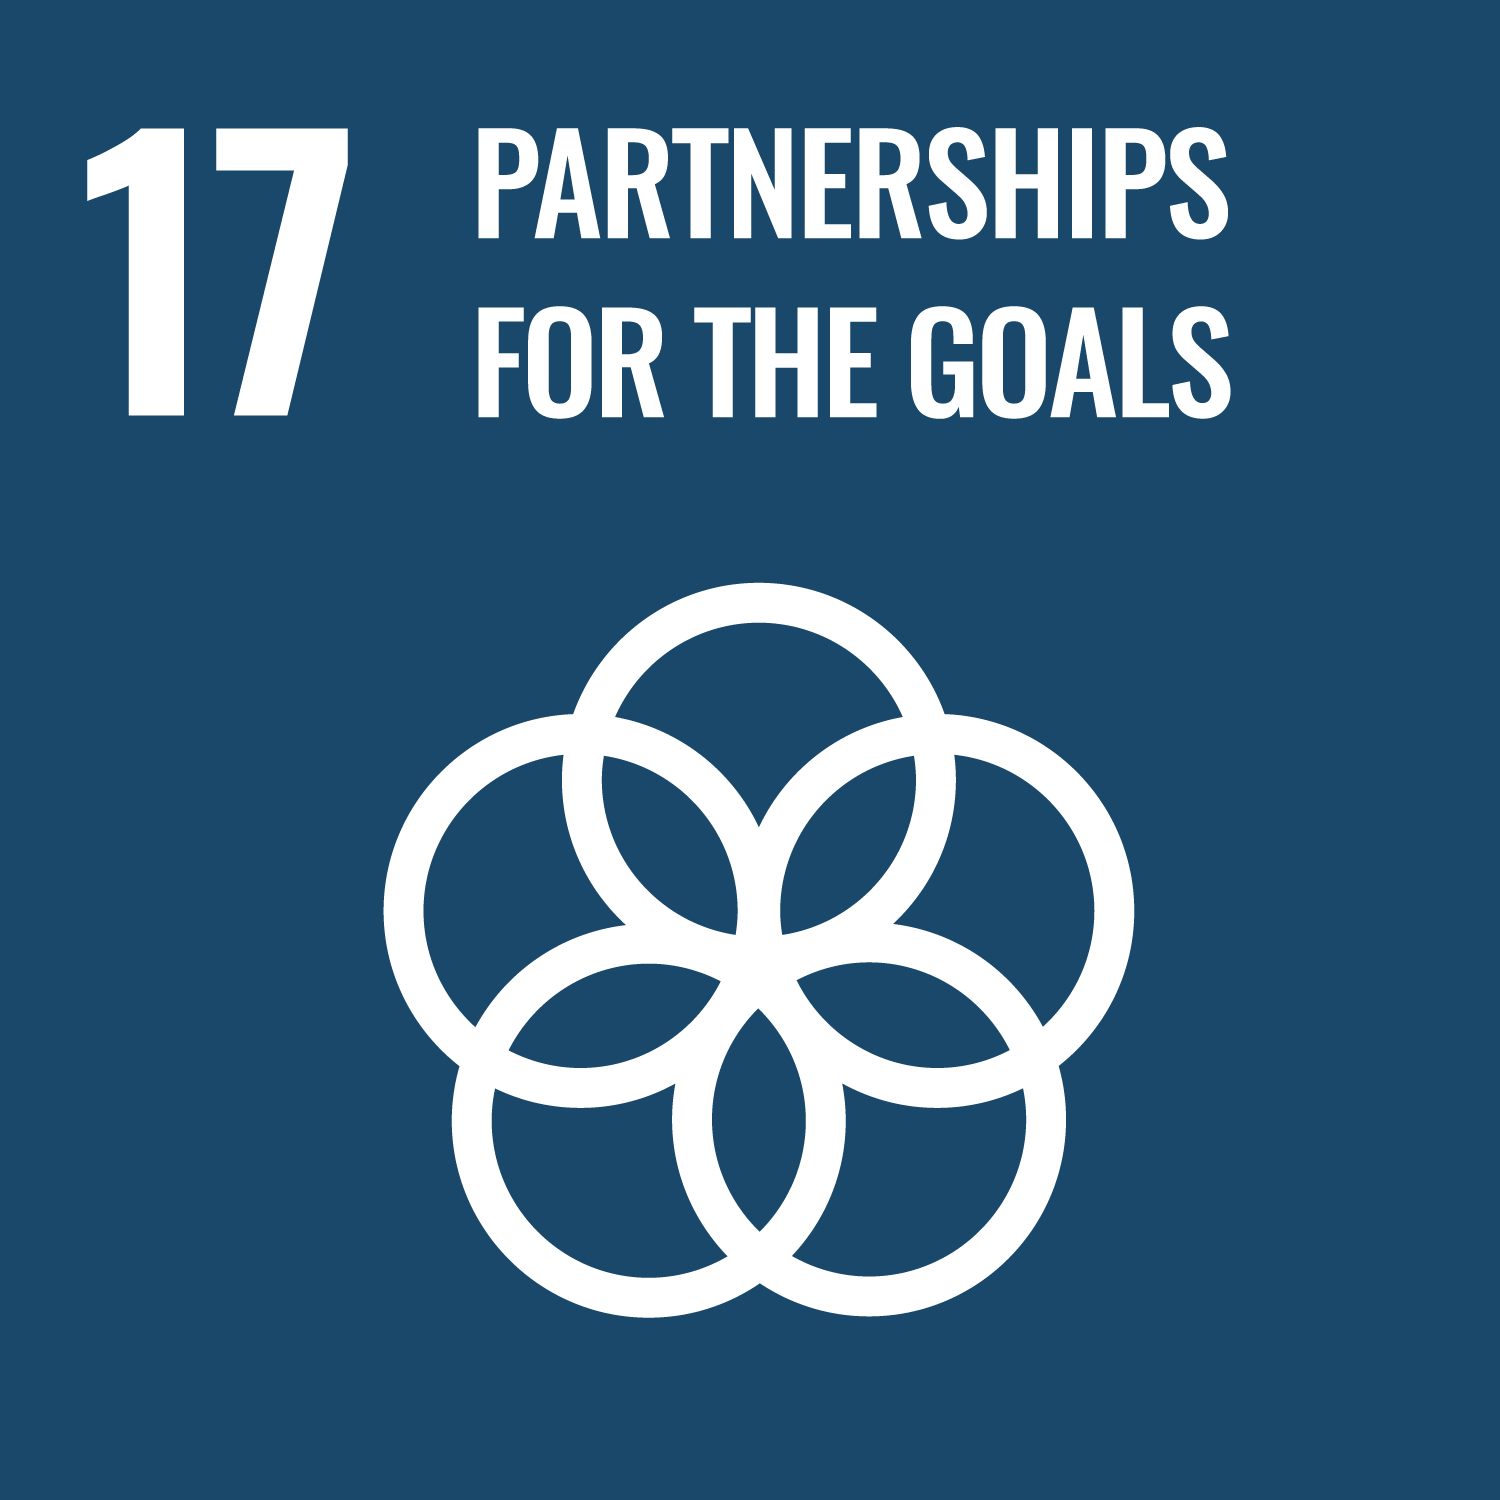 Goal Seventeen: Strengthen the means of implementation and revitalize the Global Partnership for Sustainable Development